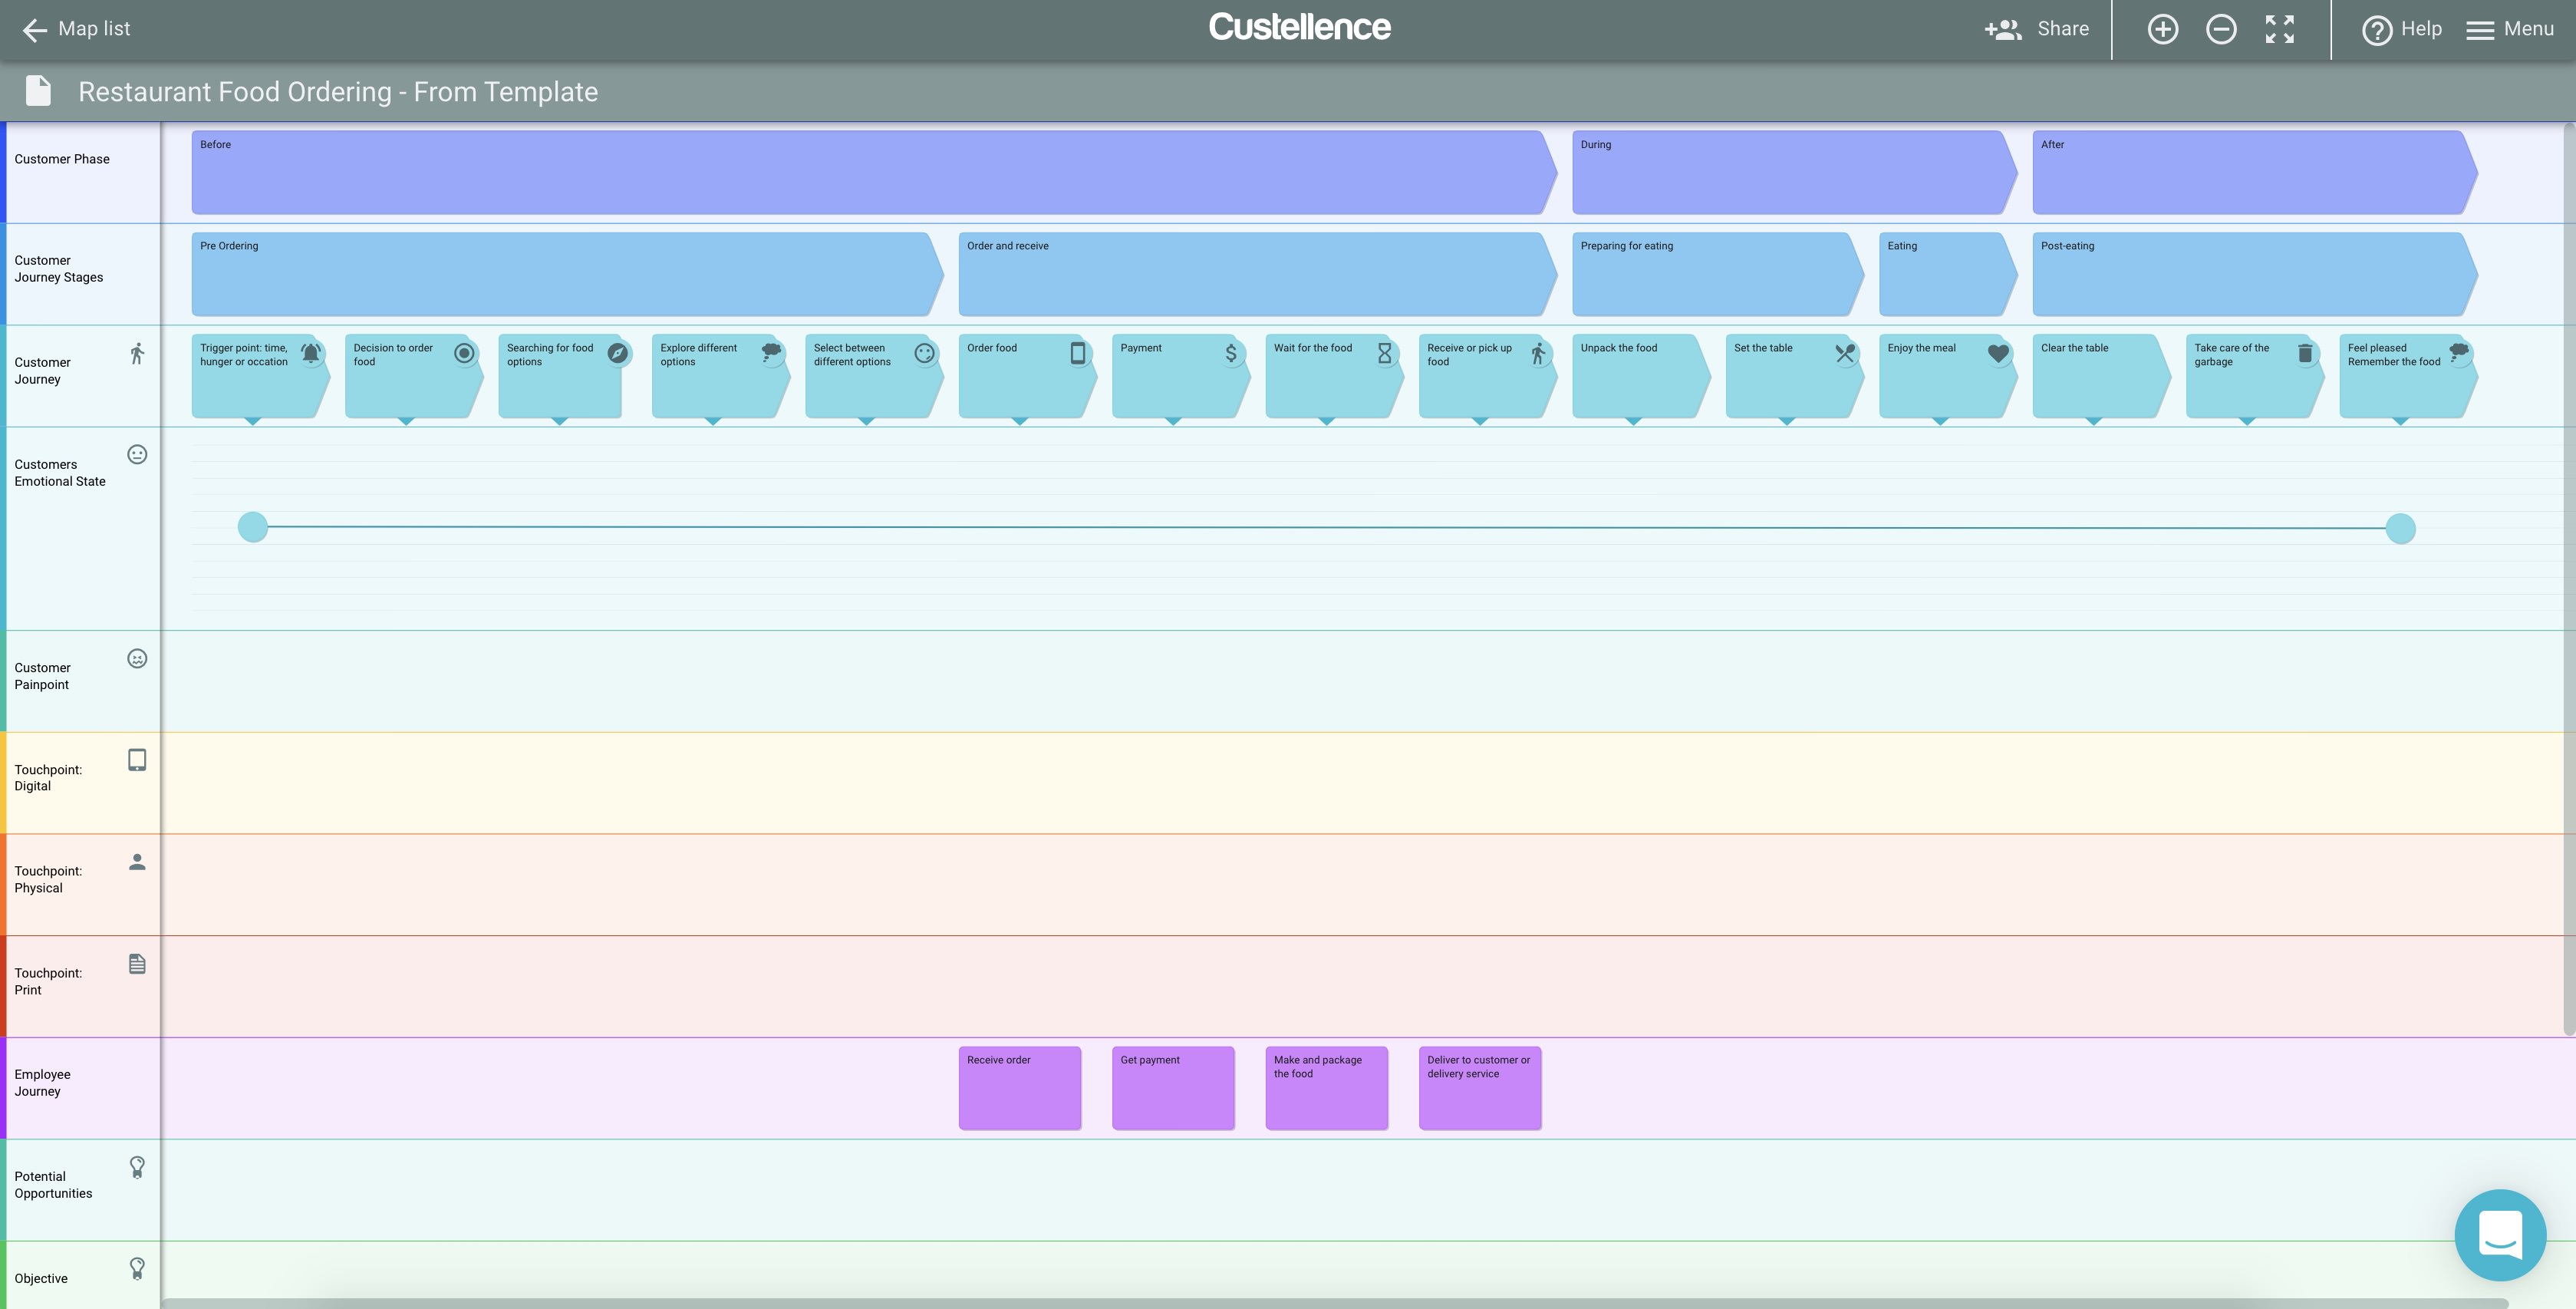 Screen capture of the Custellence interface, based on a journey map template.